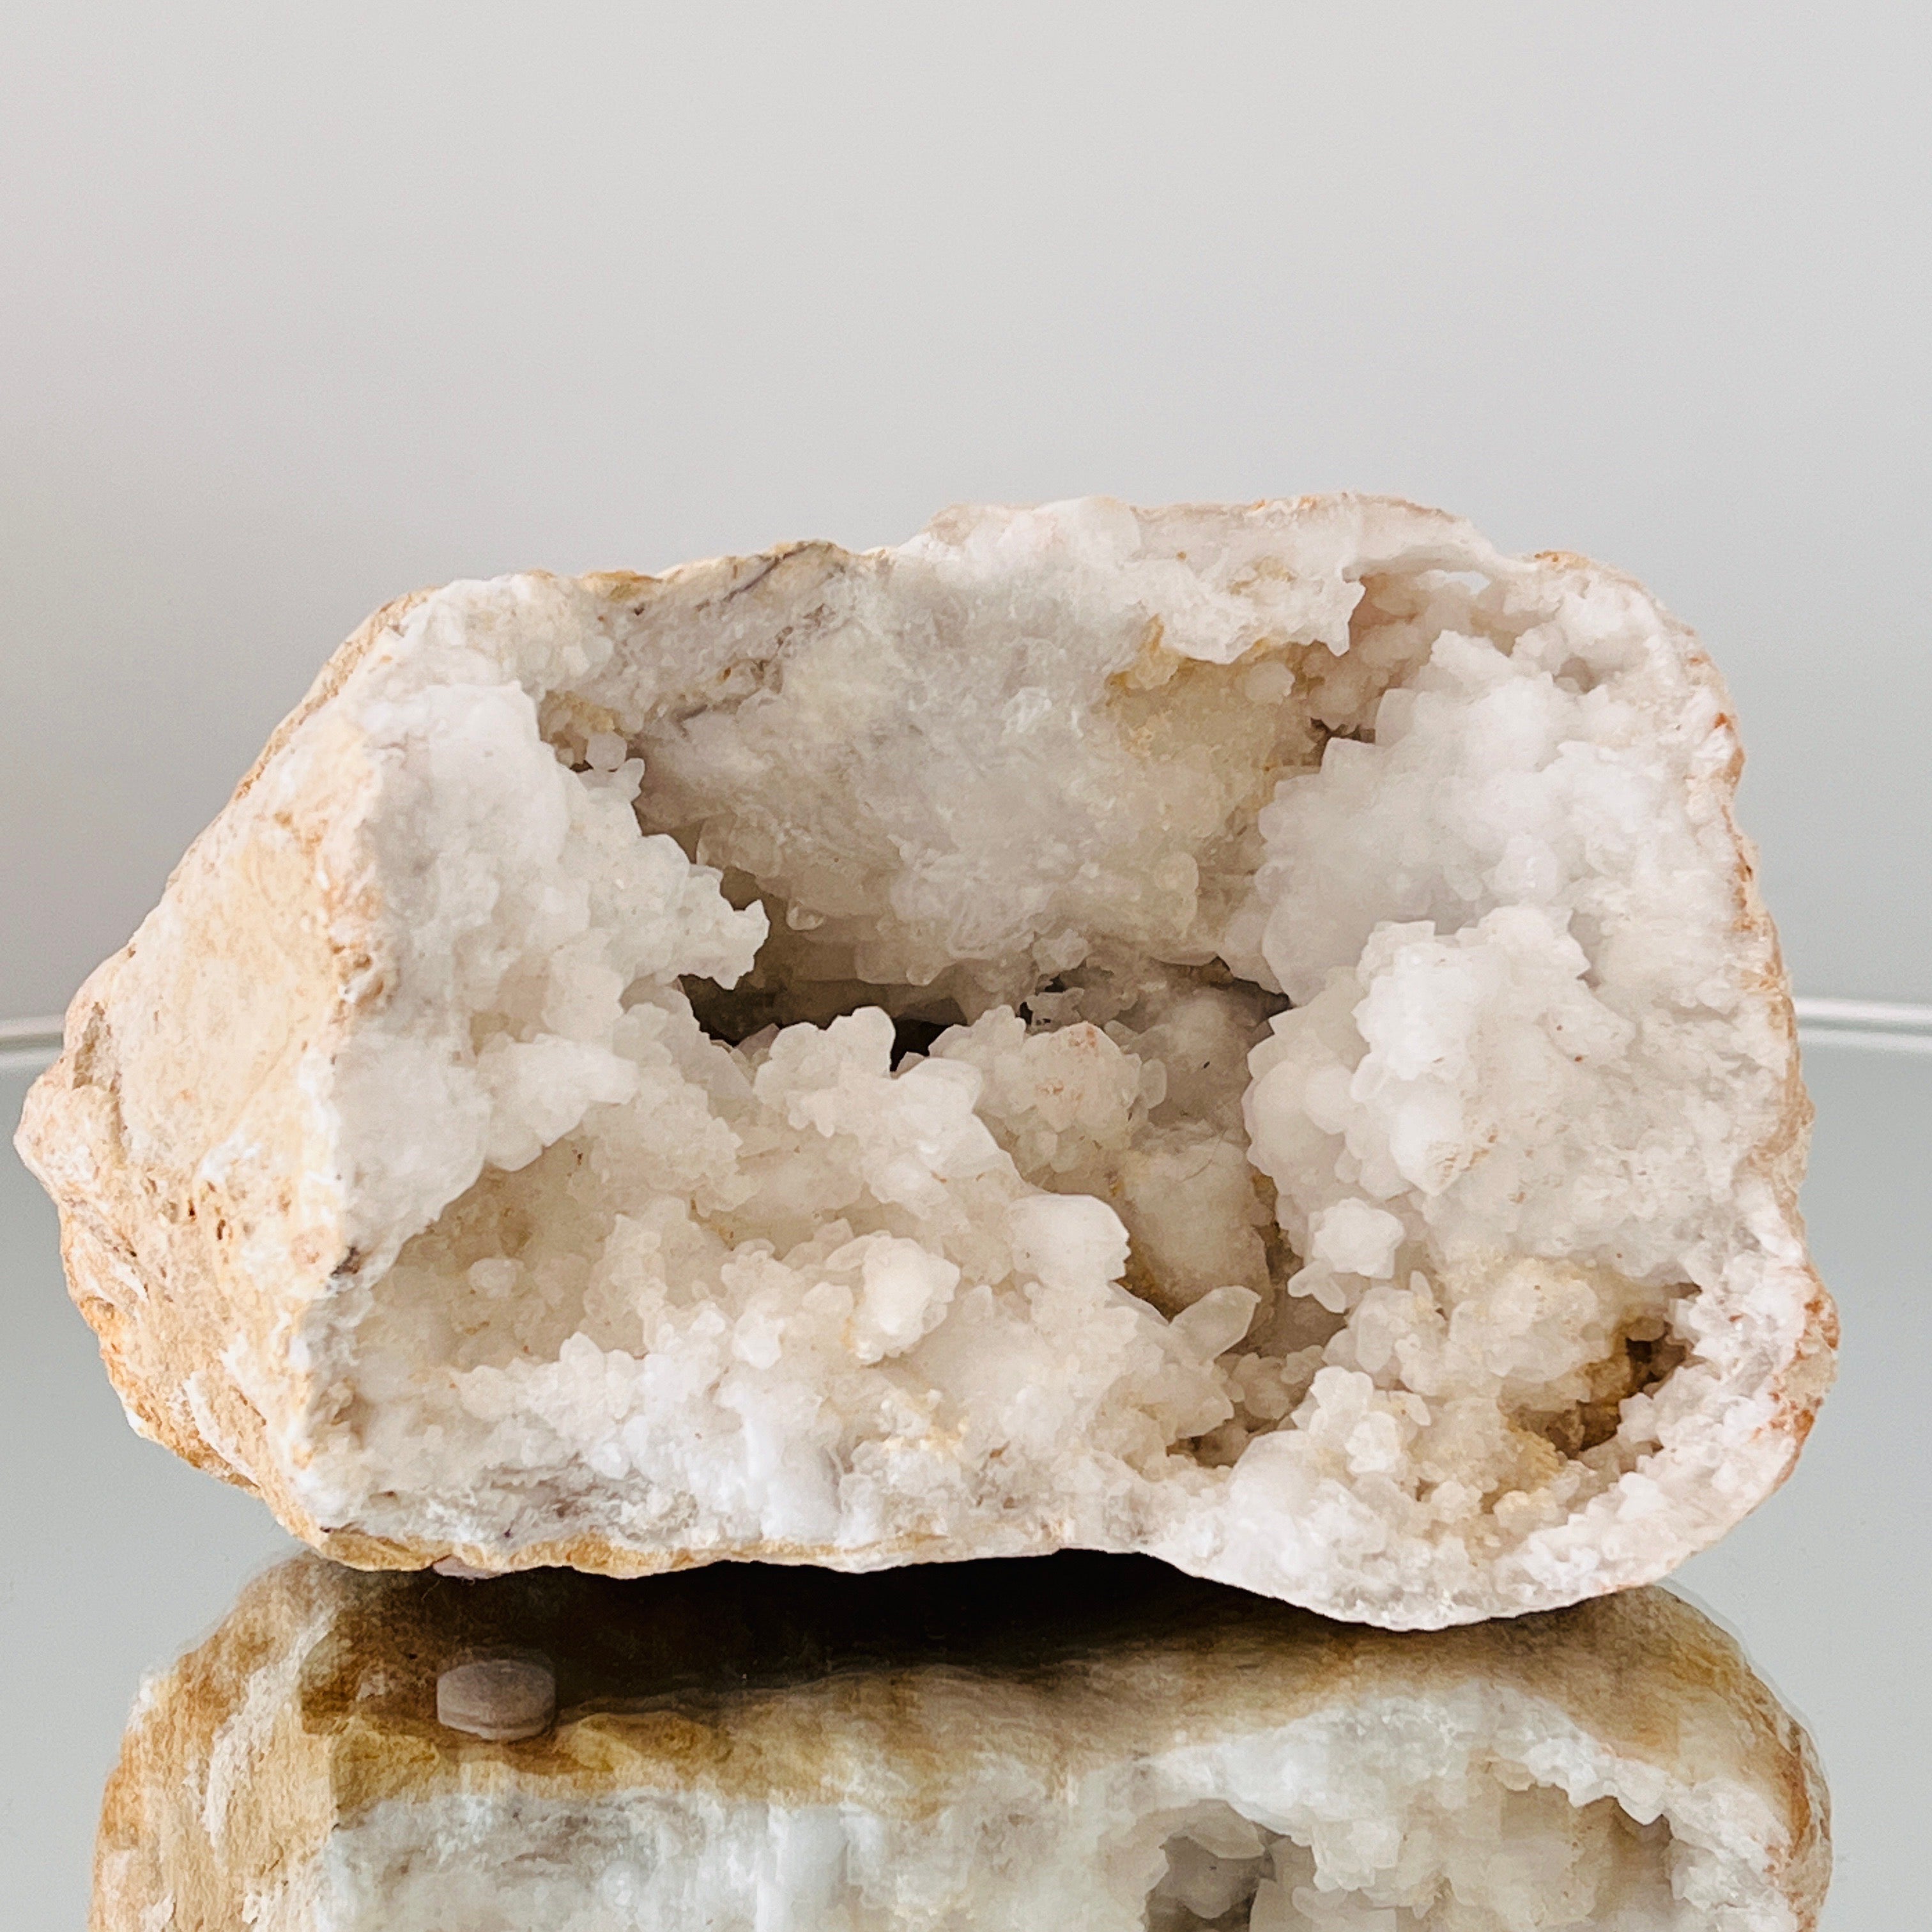 Natural quartz crystal specimen features a white crystalline center surrounded by a rock exterior in hues of tan or beige.  Taking up to a million years to form, each geode is unique, adding an organic modern design element to any room. Can be used